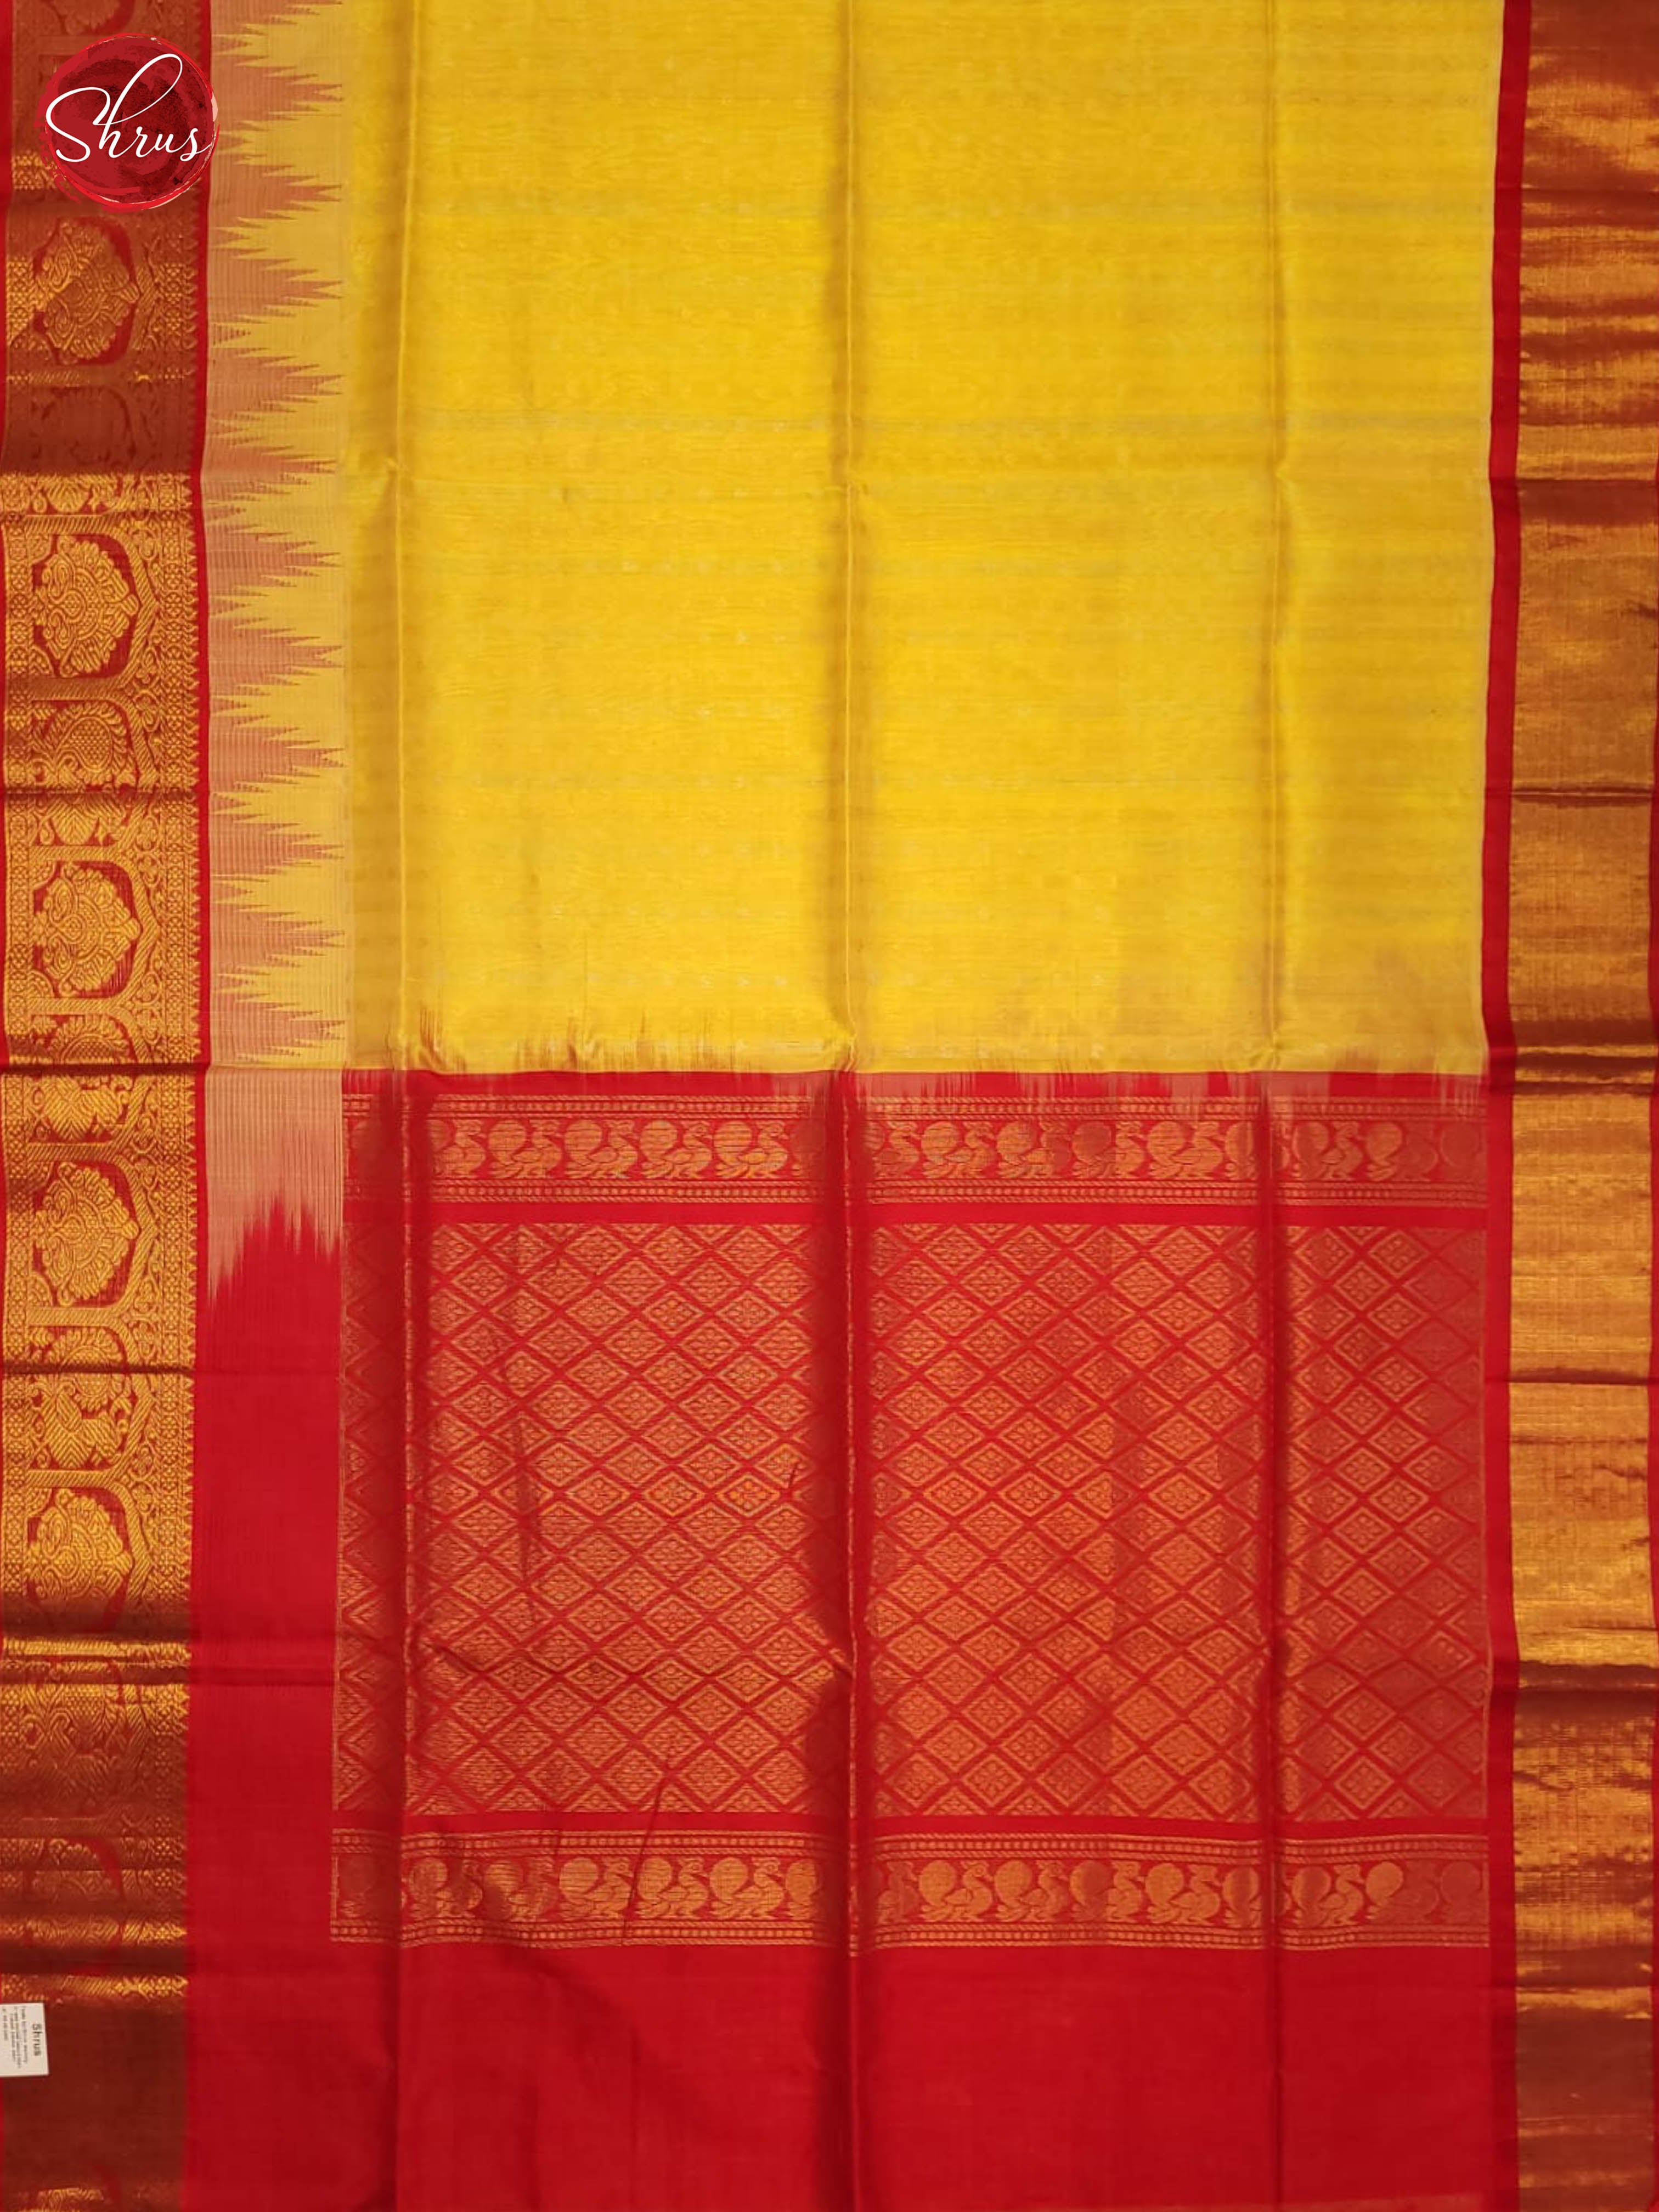 Yellow and Red-Silk Cotton saree - Shop on ShrusEternity.com